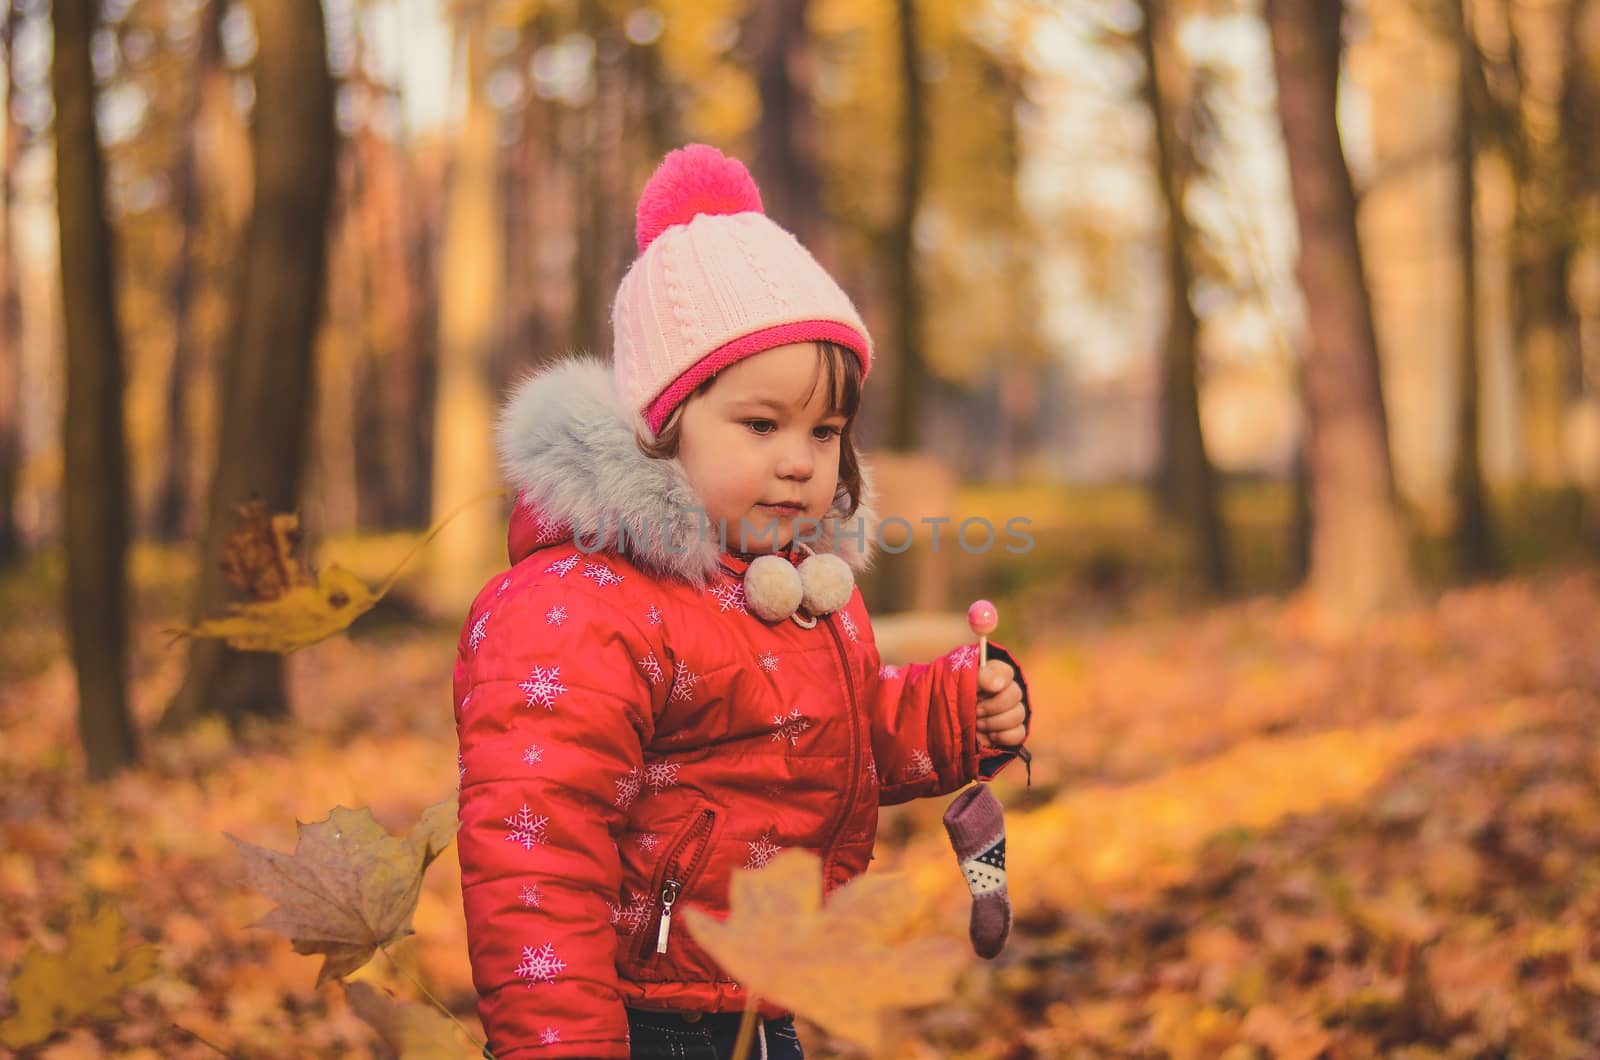 Little girl with a lollipop walks in autumn park by chernobrovin